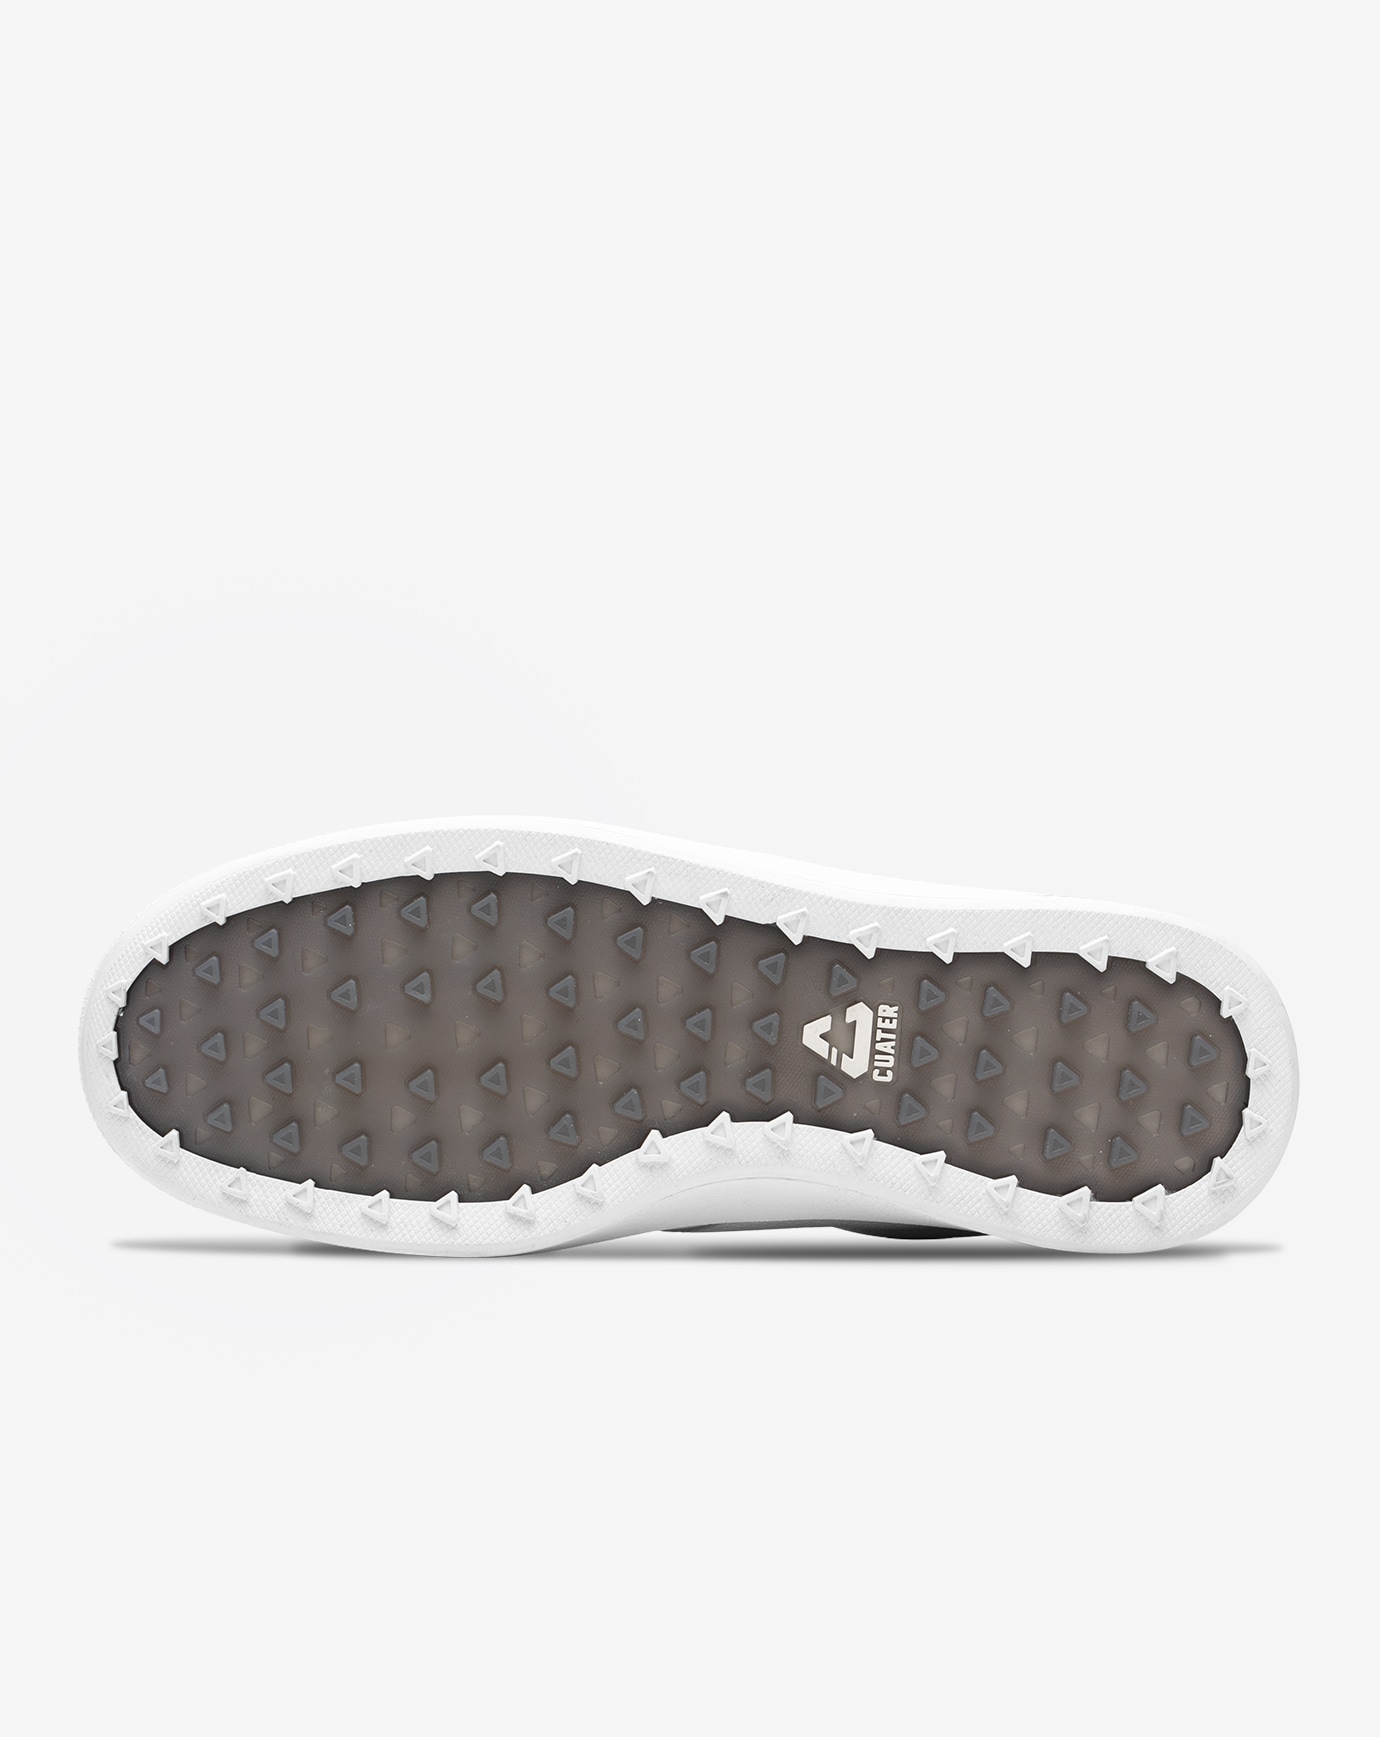 THE WILDCARD LEATHER SPIKELESS GOLF SHOE Image Thumbnail 2